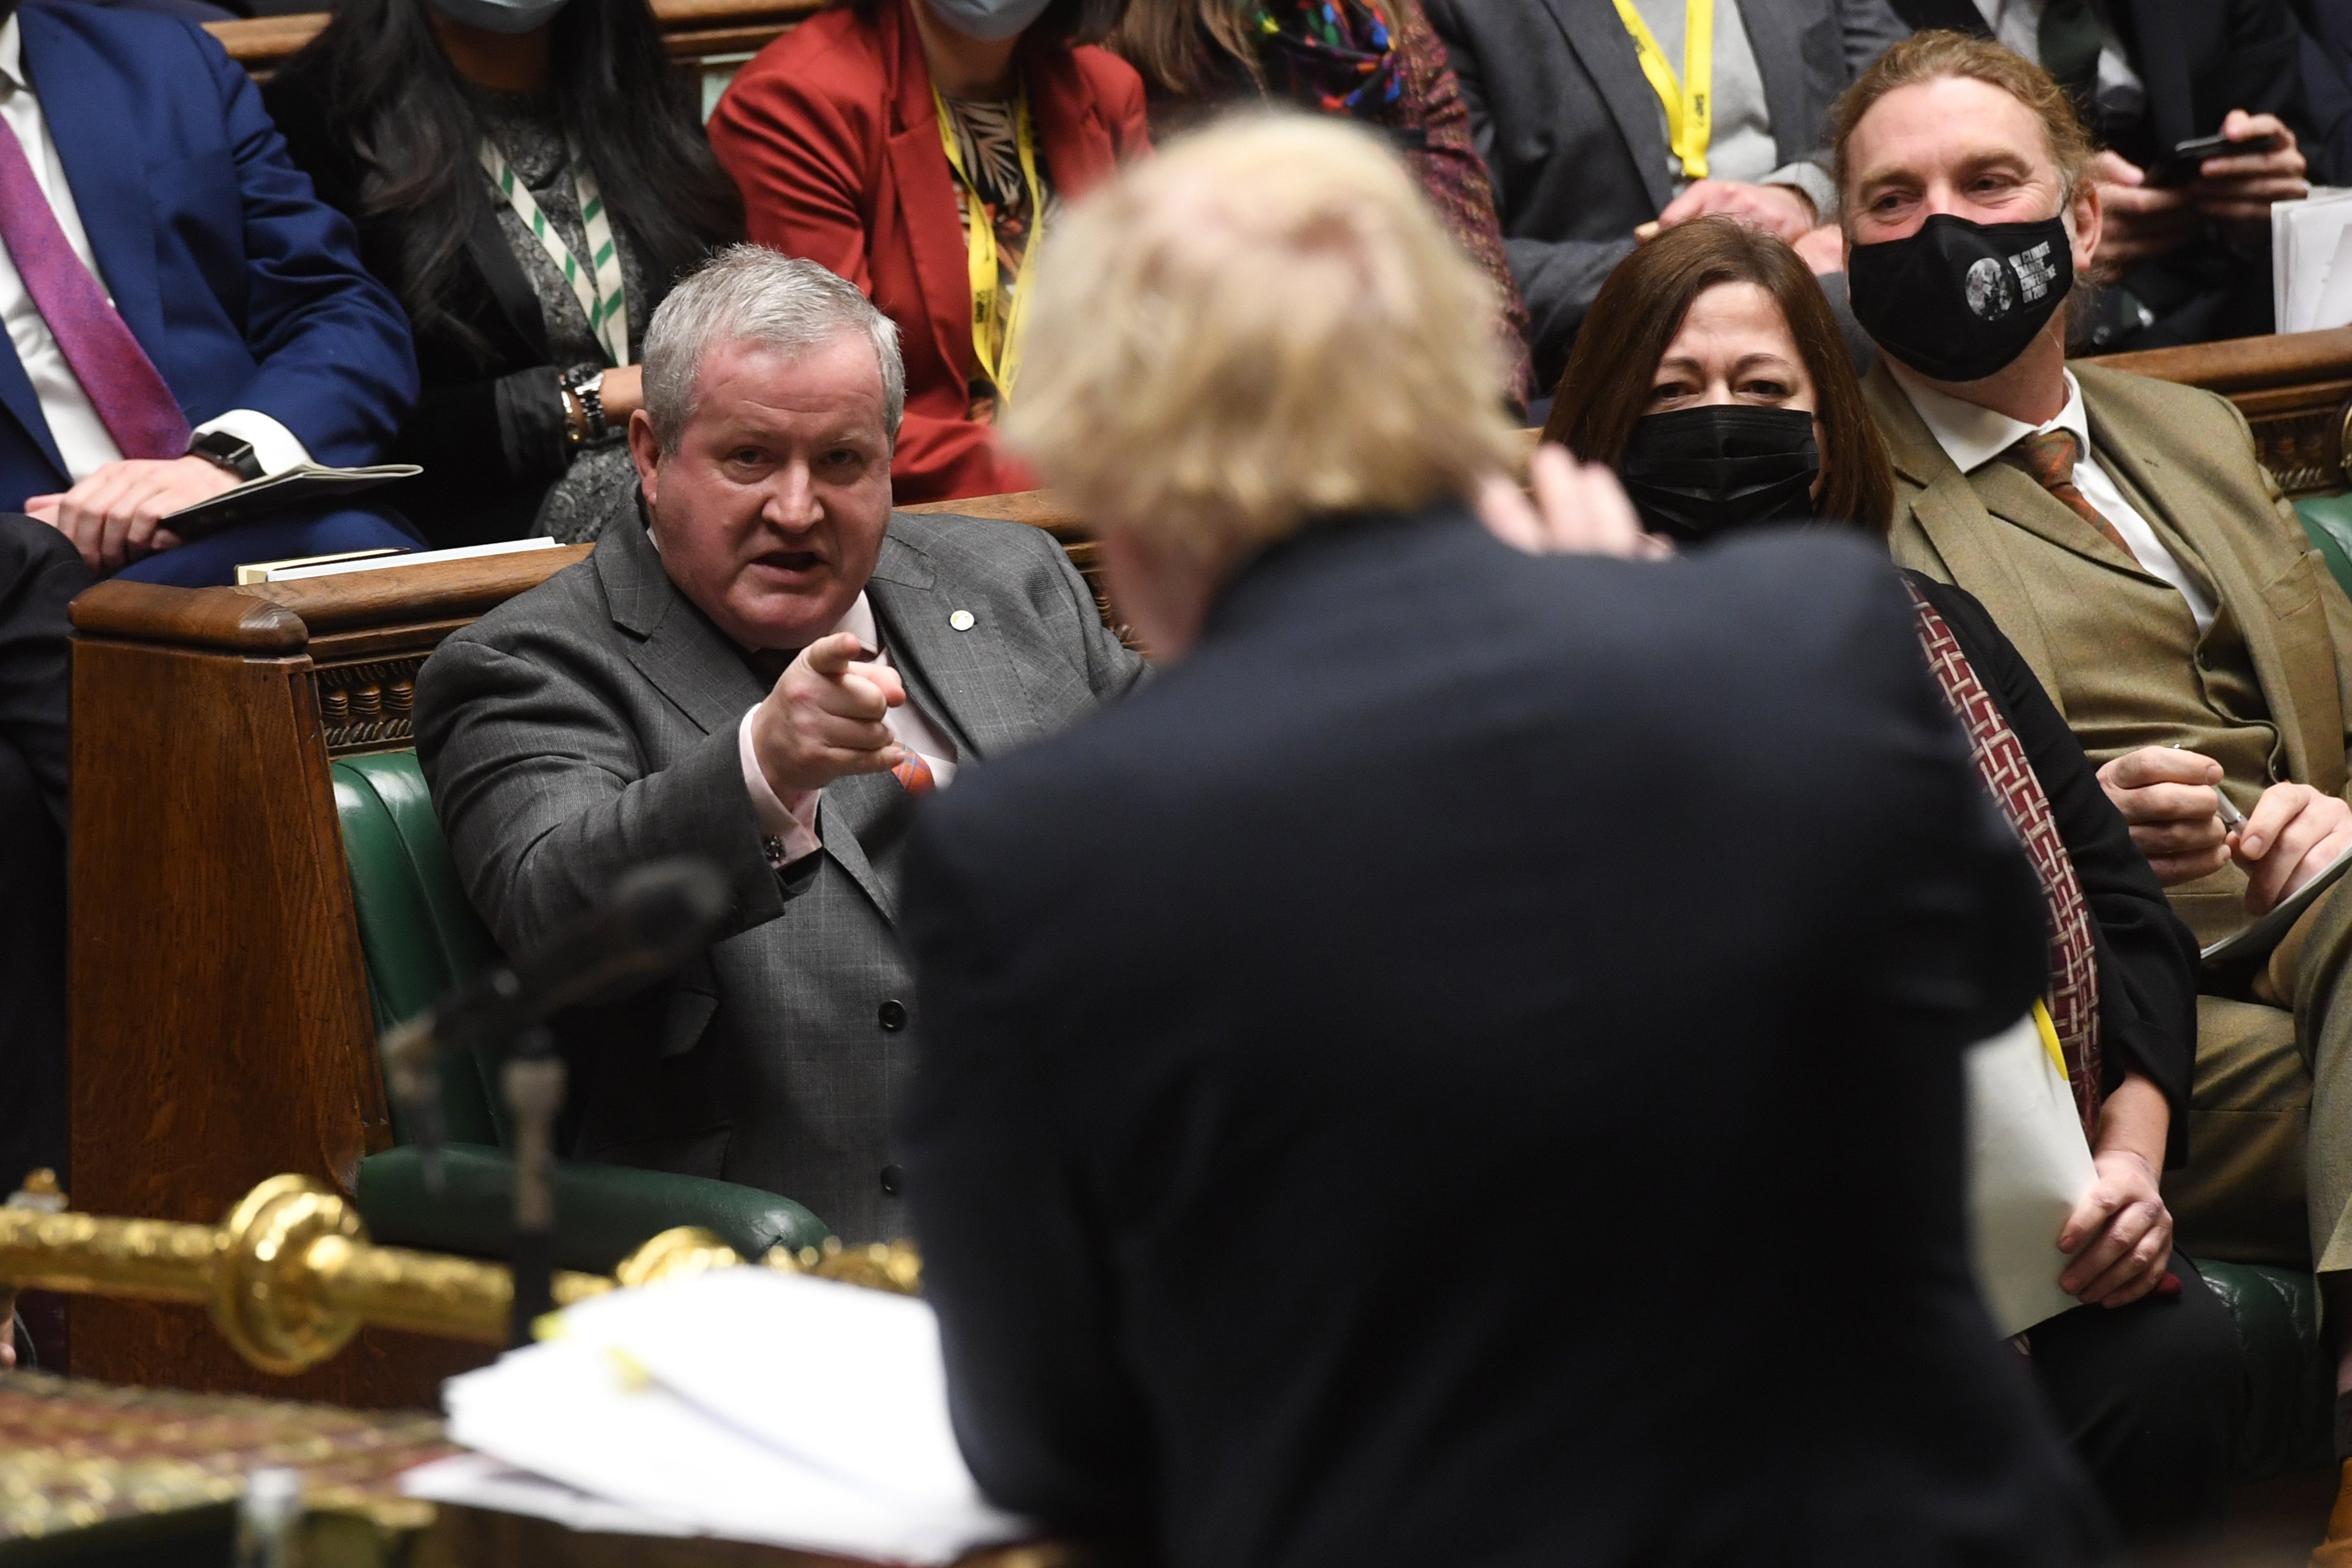 SNP Westminster leader Ian Blackford points at Prime Minister Boris Johnson during Prime Minister’s Questions in the House of Commons, London (UK Parliament/Jessica Taylor)